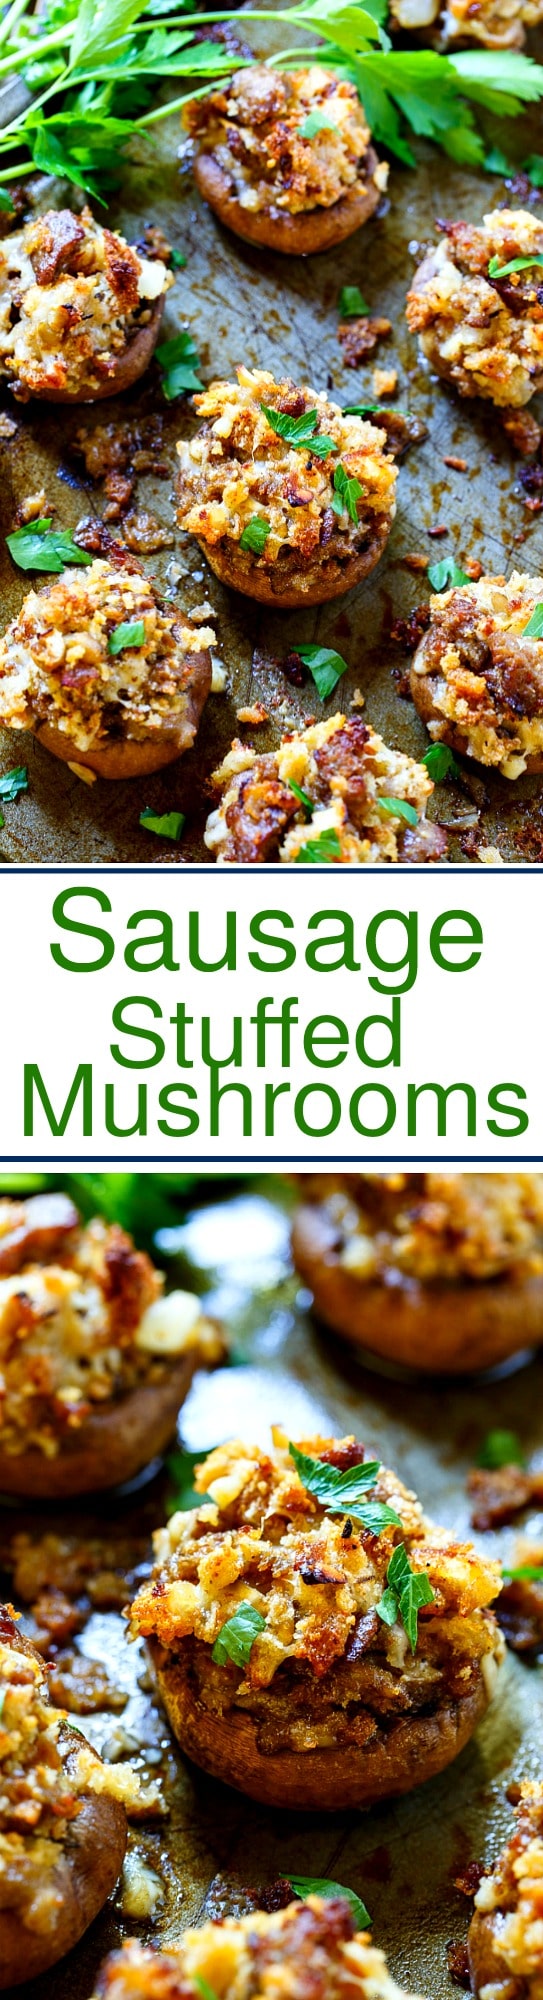 Sausage Stuffed Mushrooms make a delicious appetizer